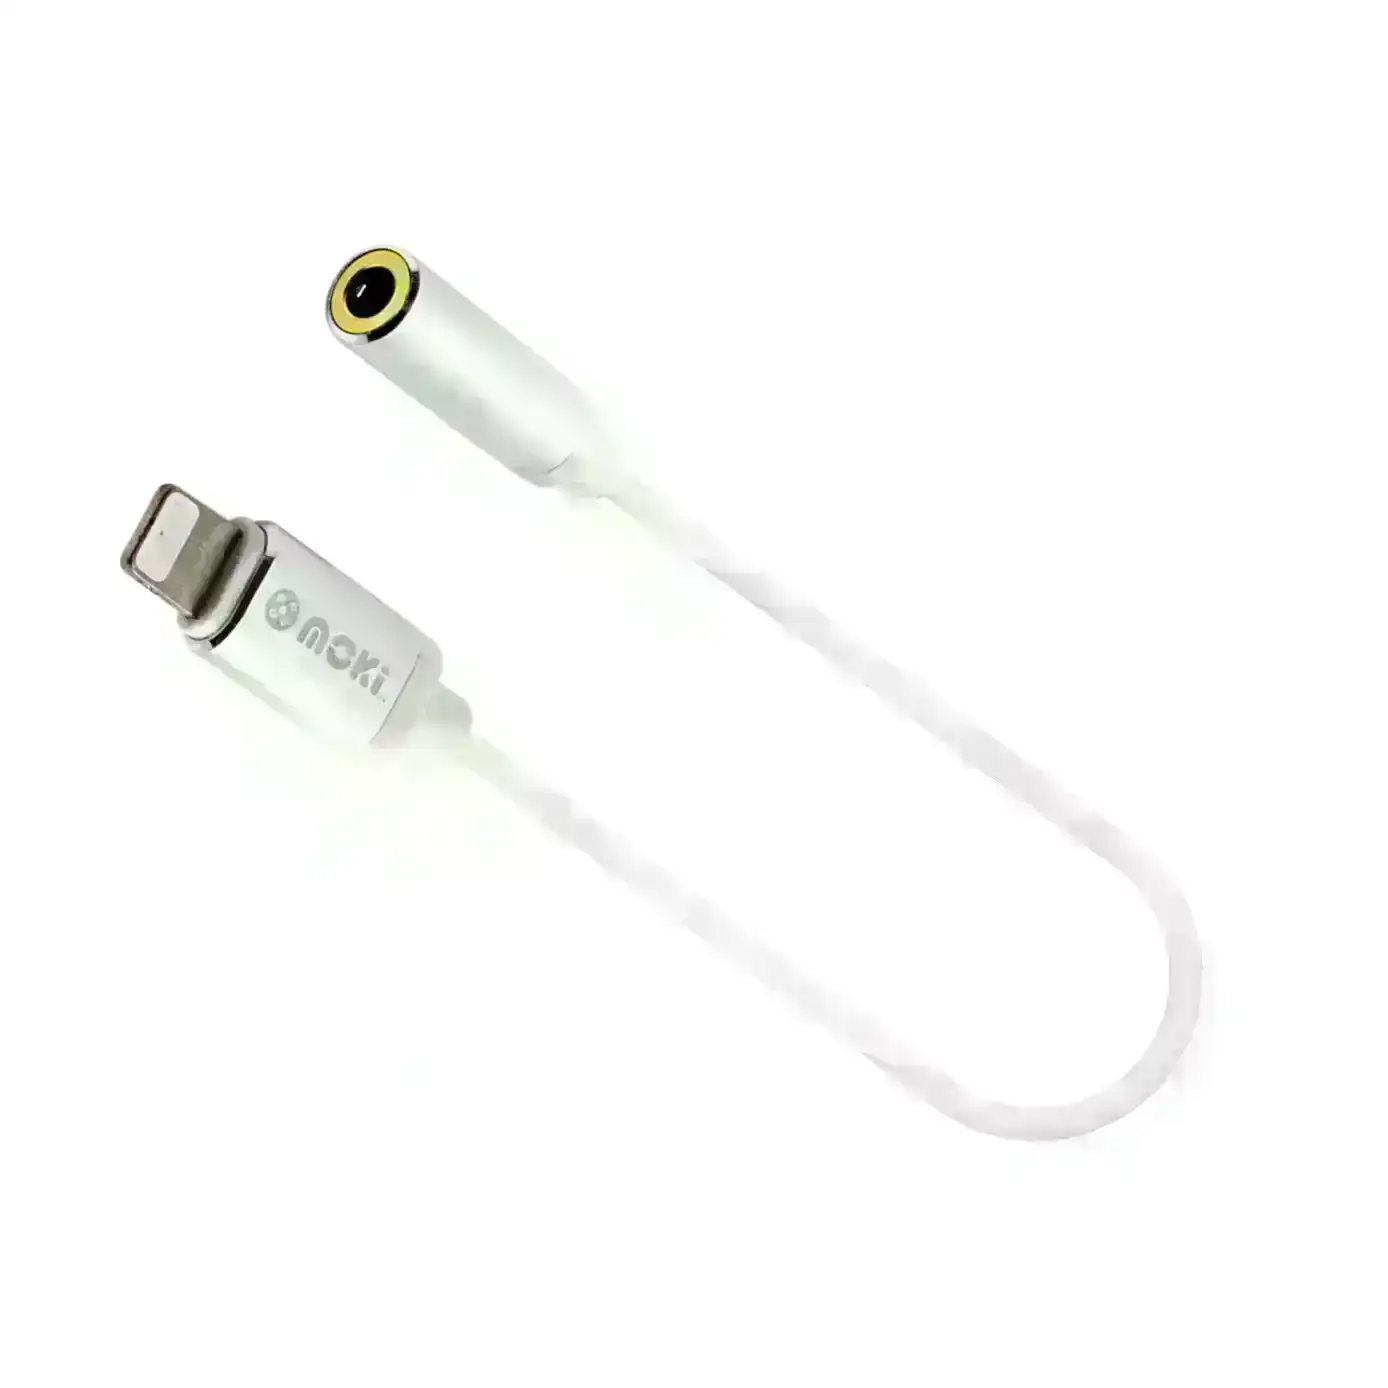 Moki Lightning to 3.5mm Audio Adaptor for iPhone/iPad/iPod to Cabled Headphones